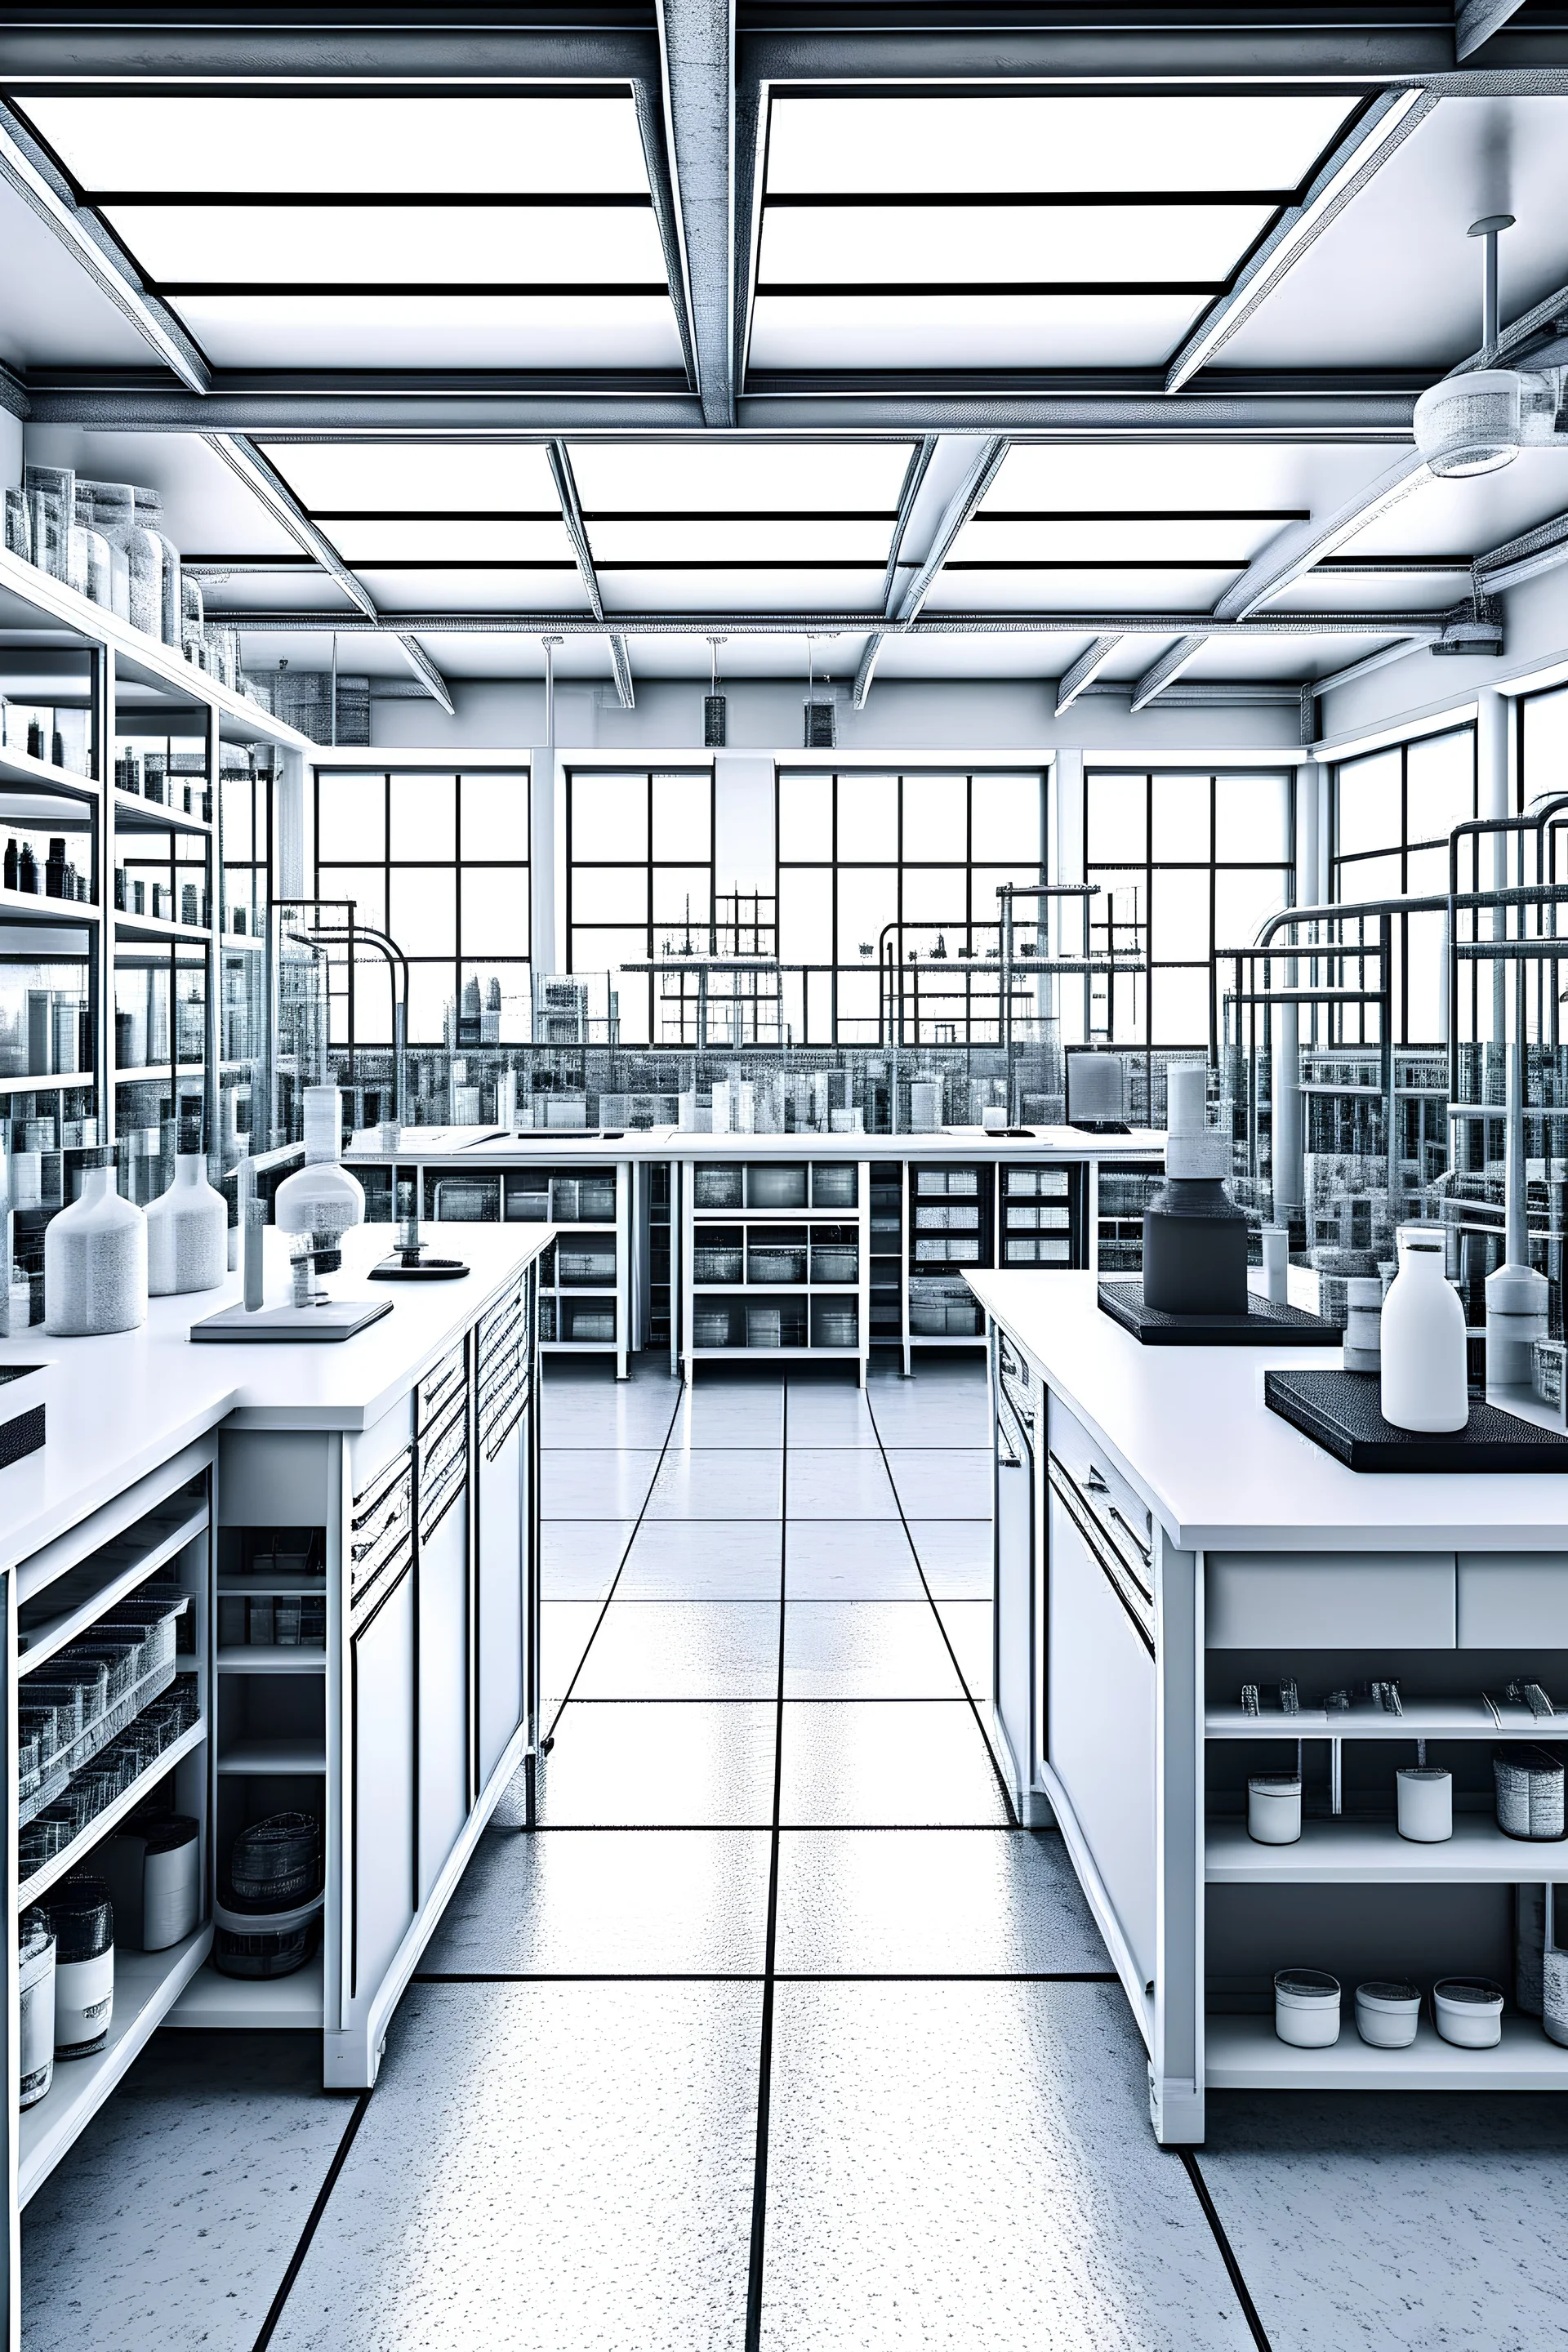 A chemical laboratory full of chemical laboratory tools in a large area